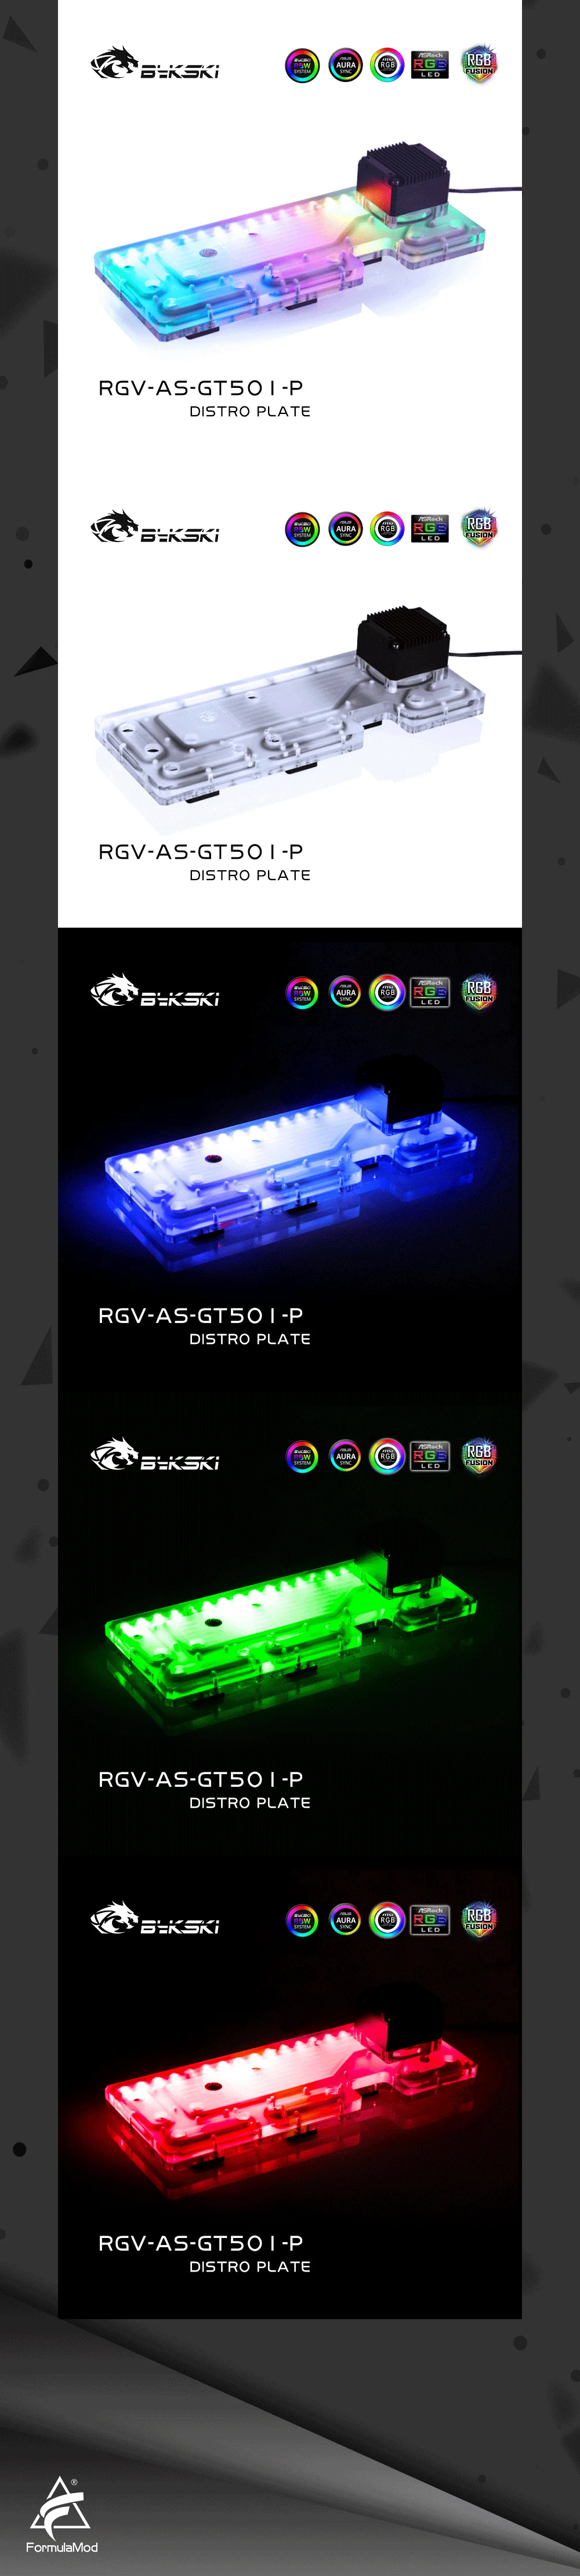 Bykski Distro Plate For Asus TUF GT501 Case,  Acrylic Waterway Board Combo DDC Pump, 5V A-RGB, RGV-AS-GT501-P  